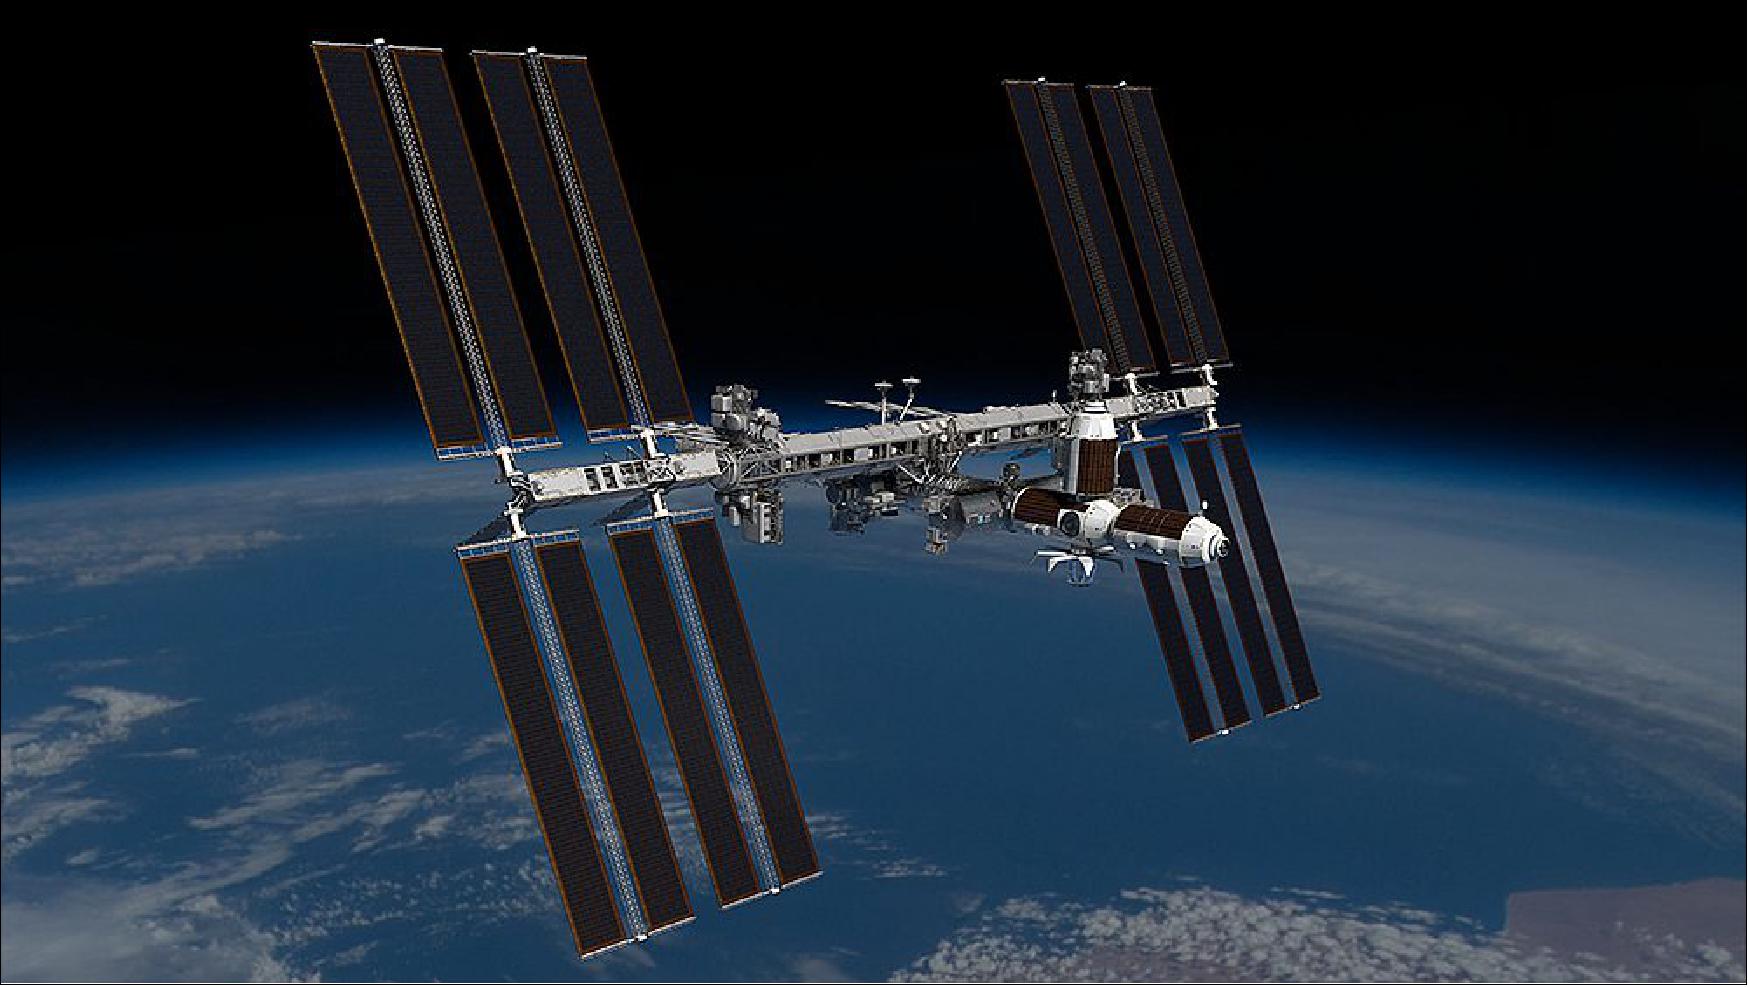 Figure 27: Illustration of the AXIOM modules attached to the ISS (image credit: Axiom)